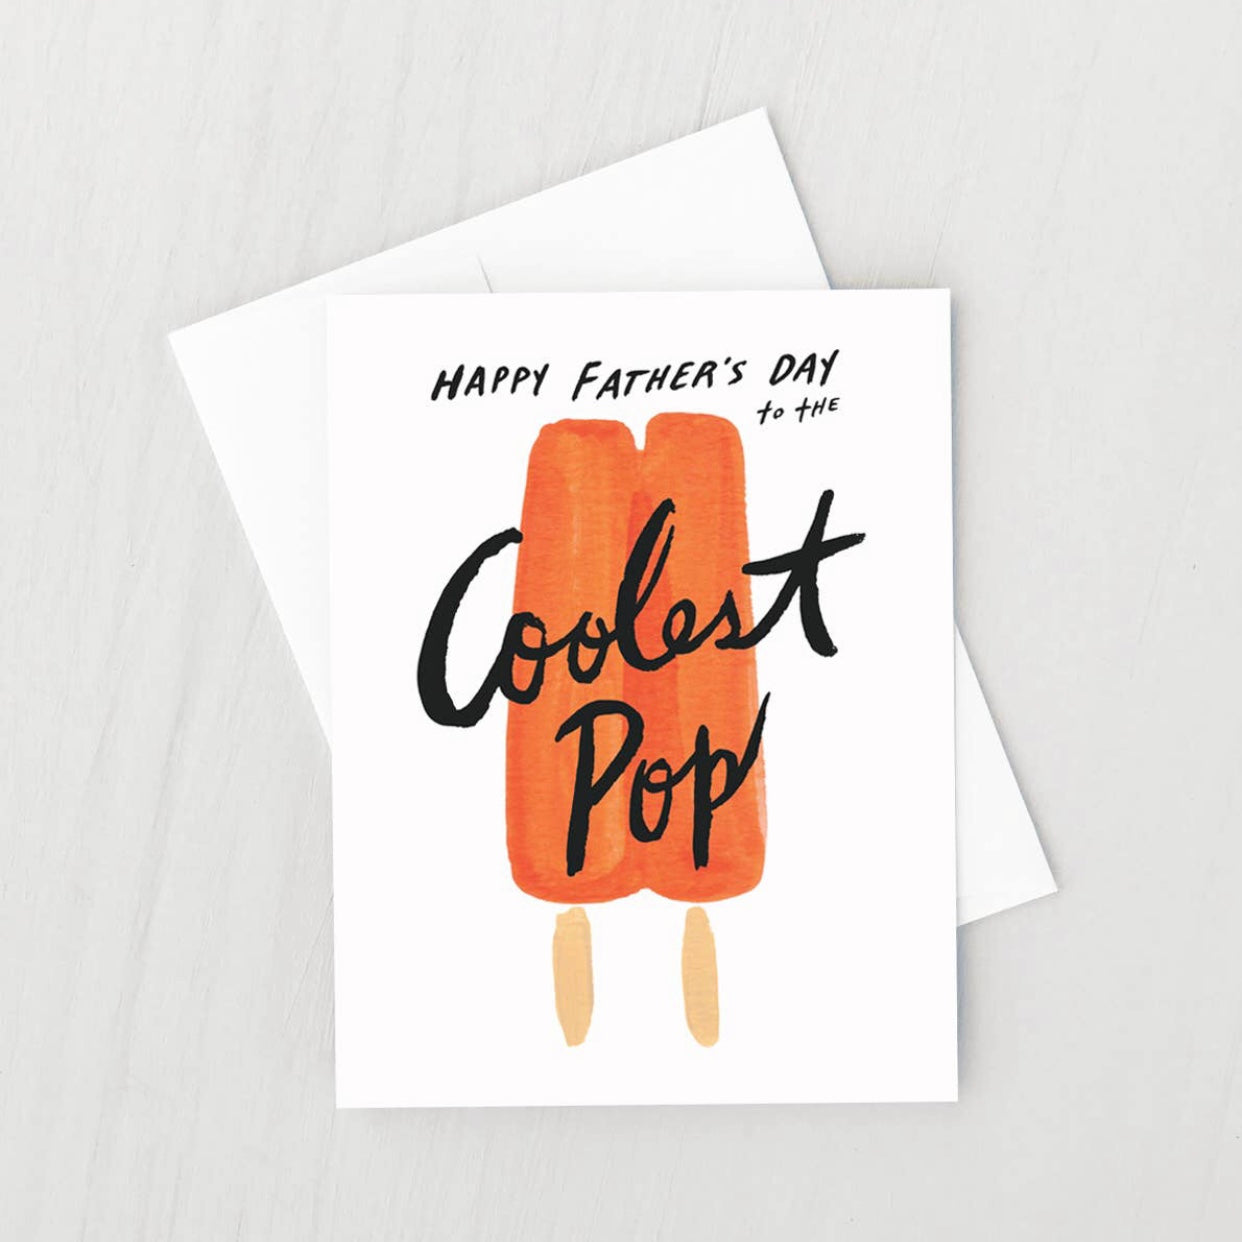 Coolest Pop fathers day card